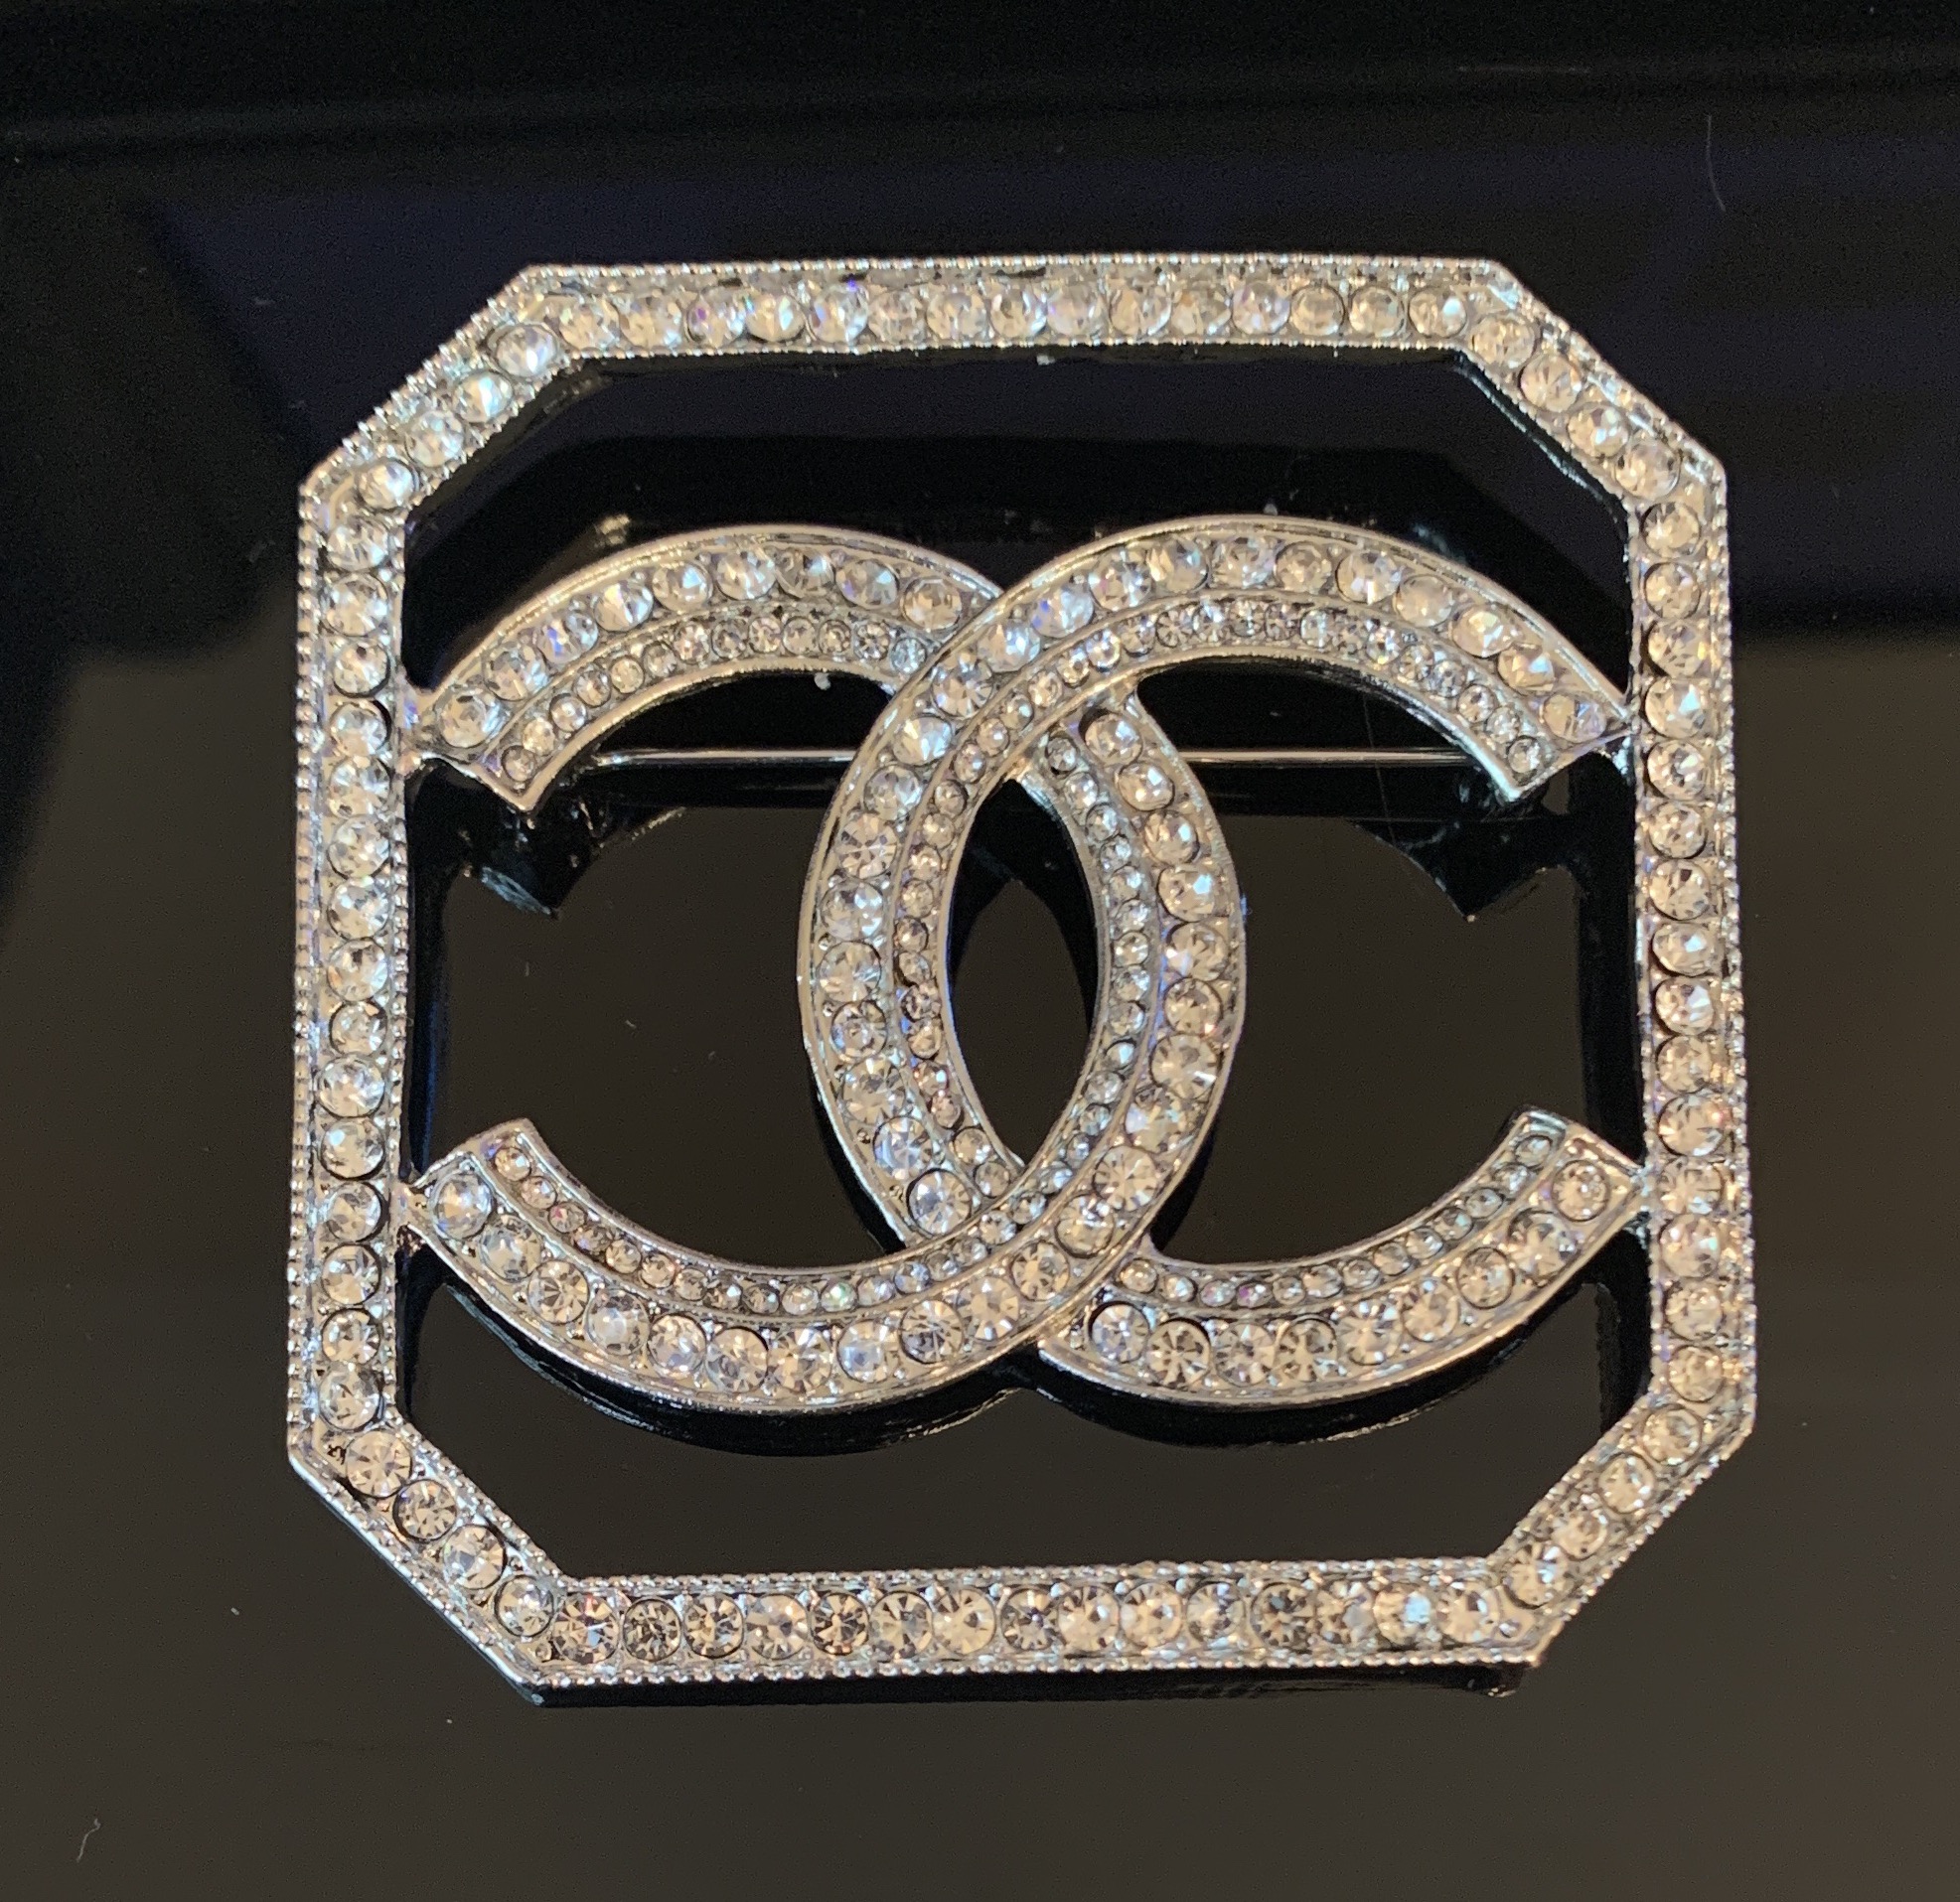 Shop CHANEL Brooches & Corsages (ABA373 B10532 NN153) by MBAPPE